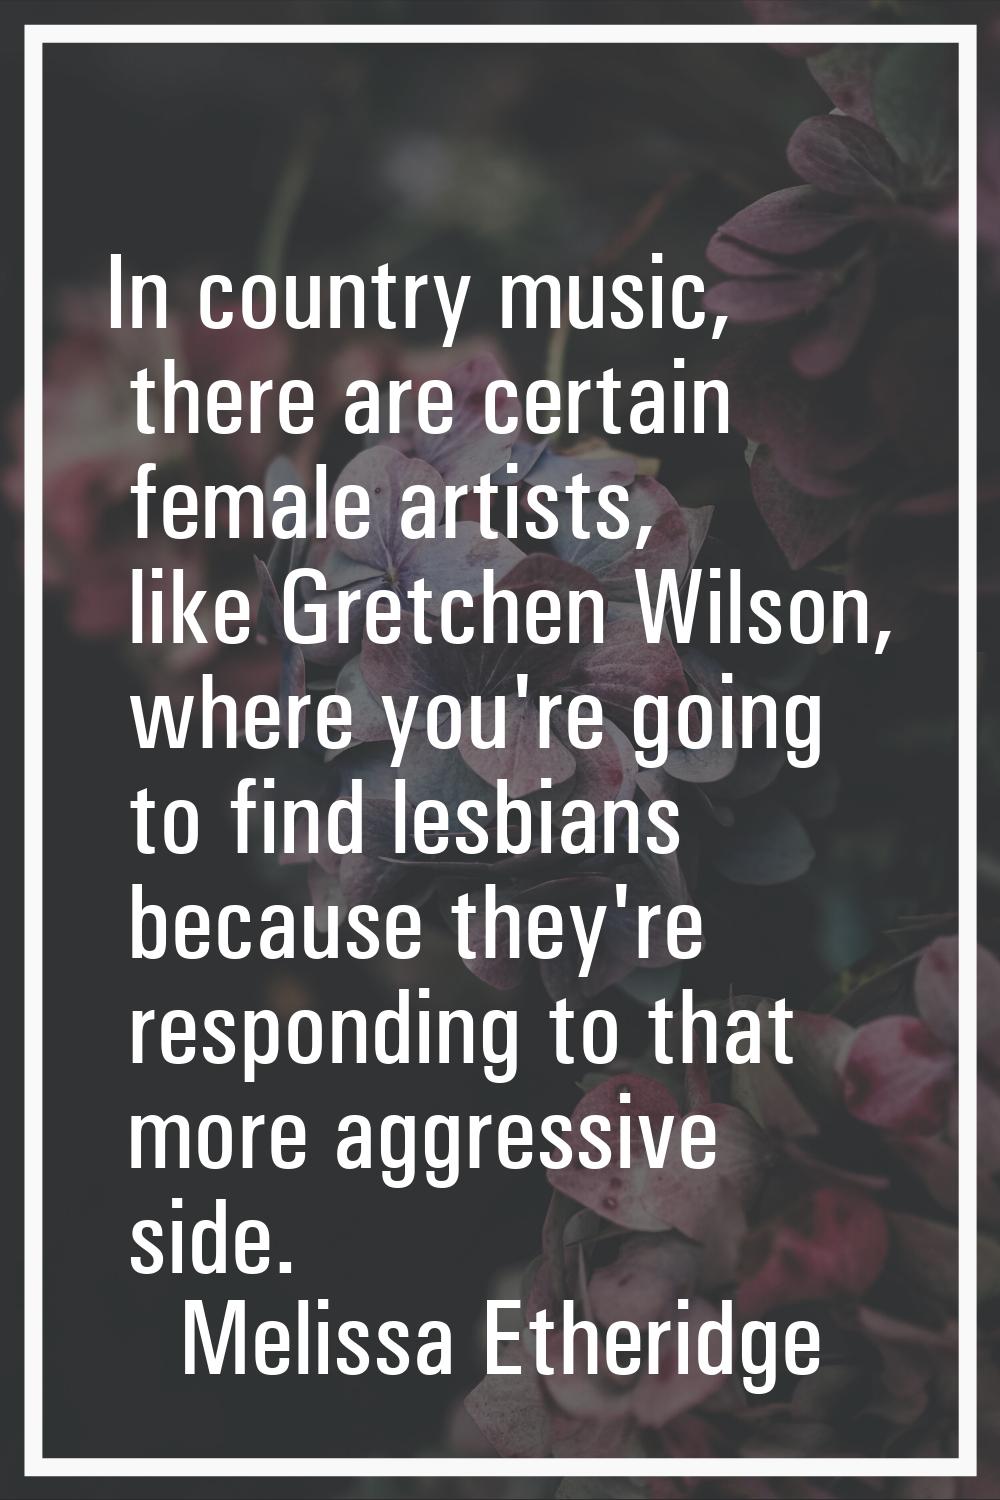 In country music, there are certain female artists, like Gretchen Wilson, where you're going to fin